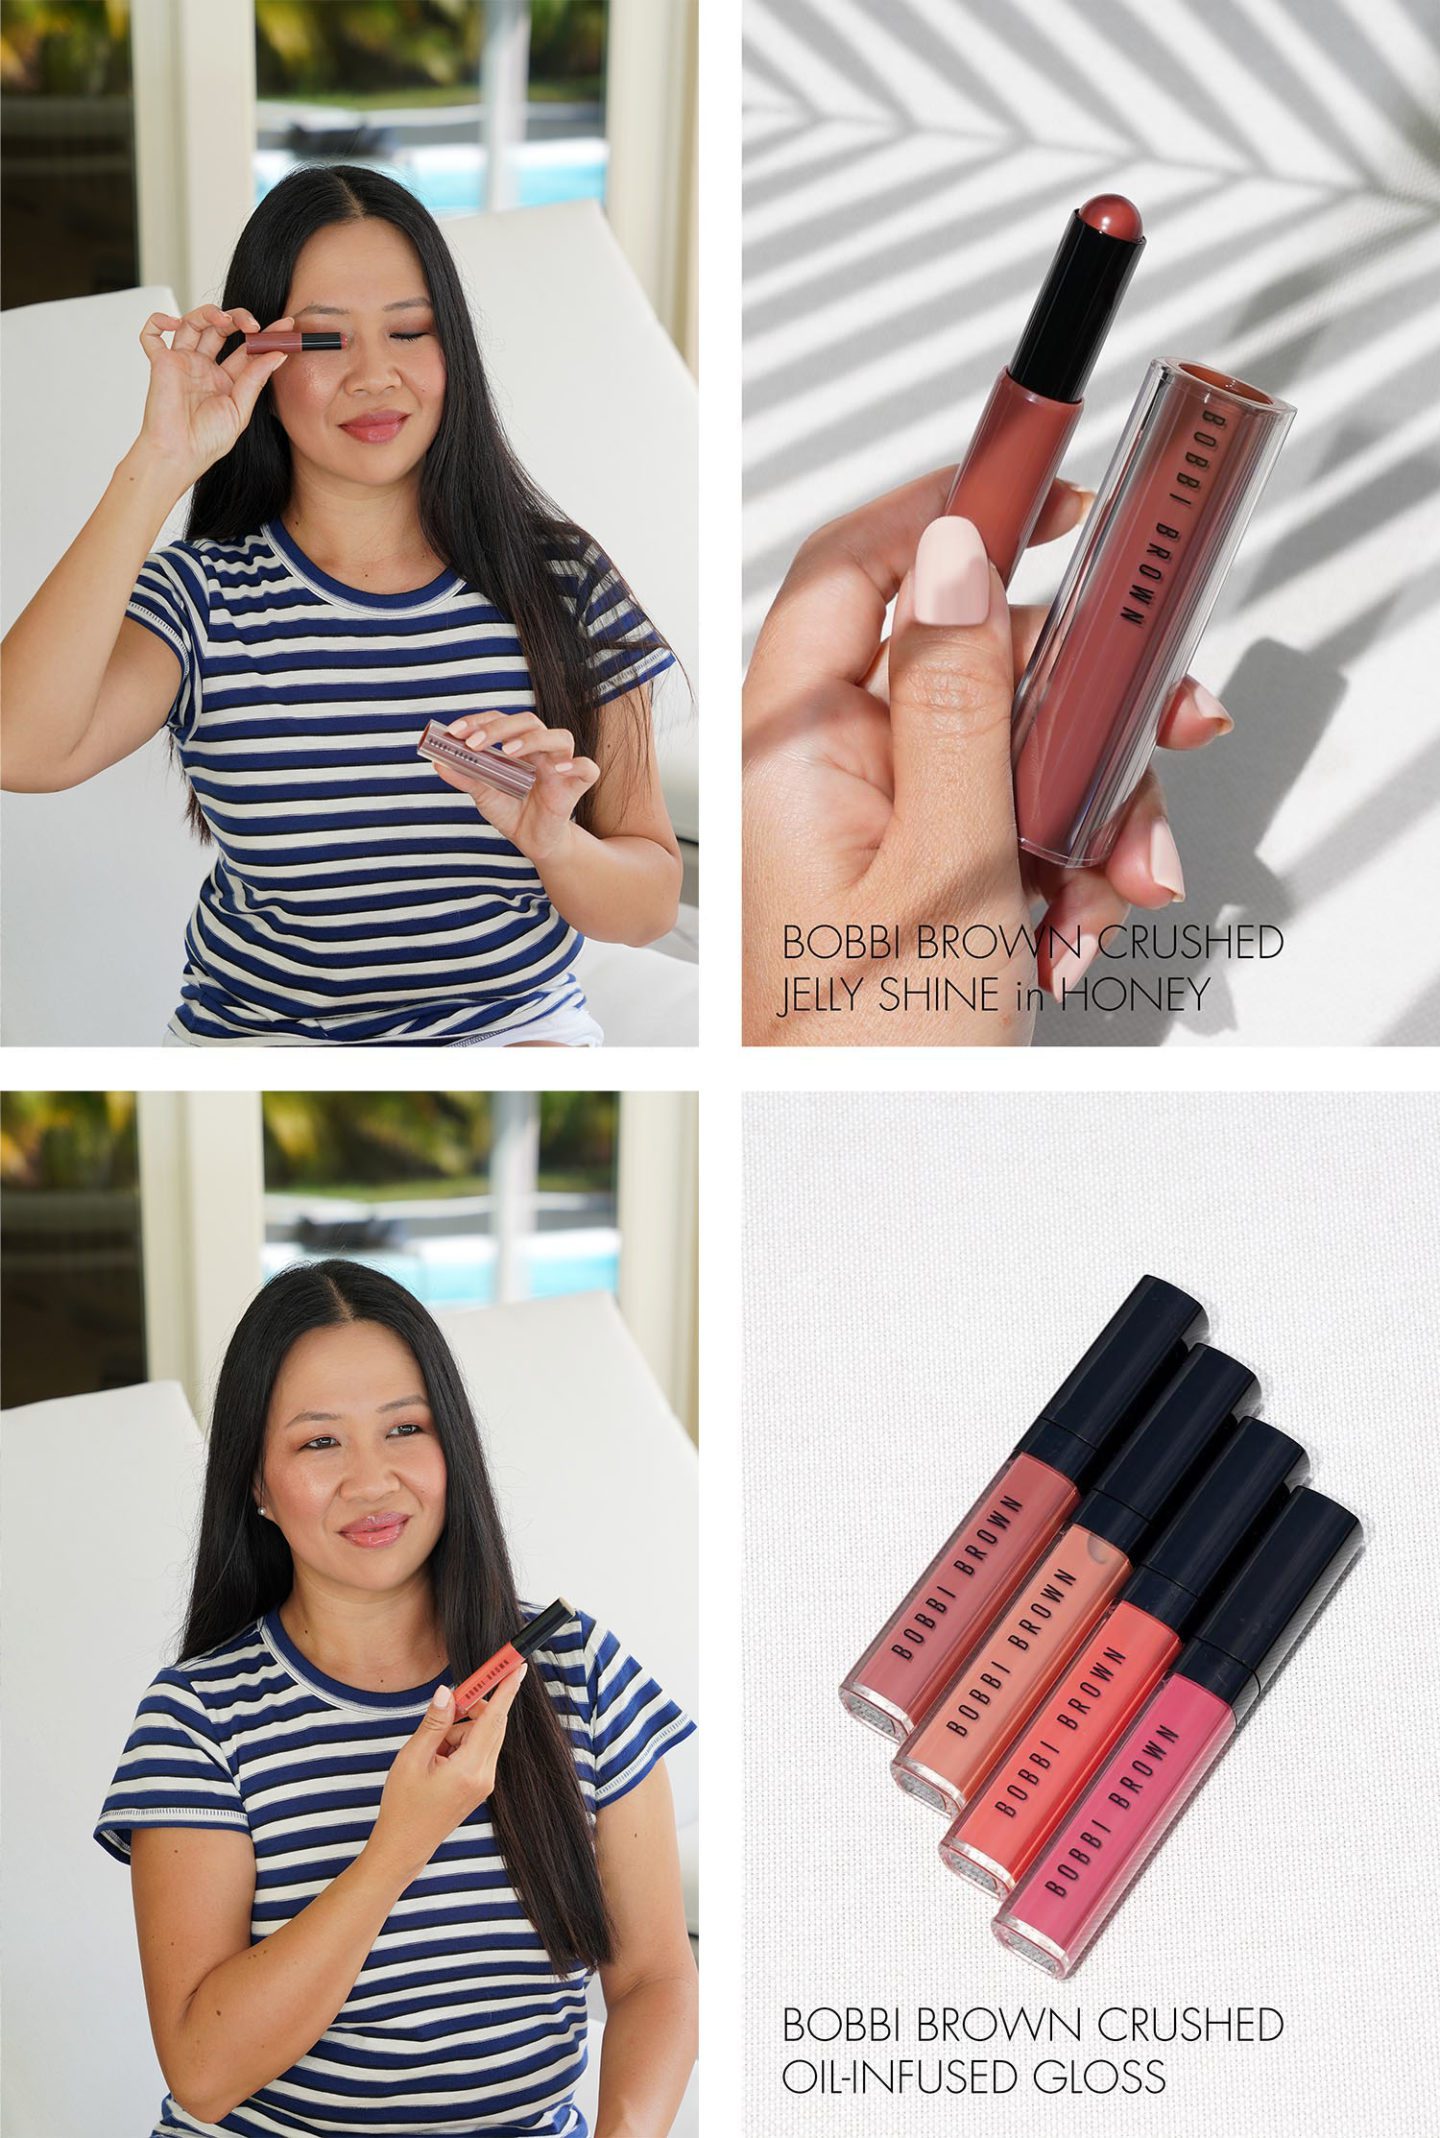 Bobbi Brown Crushed Jelly Stick and Crushed Oil-Infused Gloss